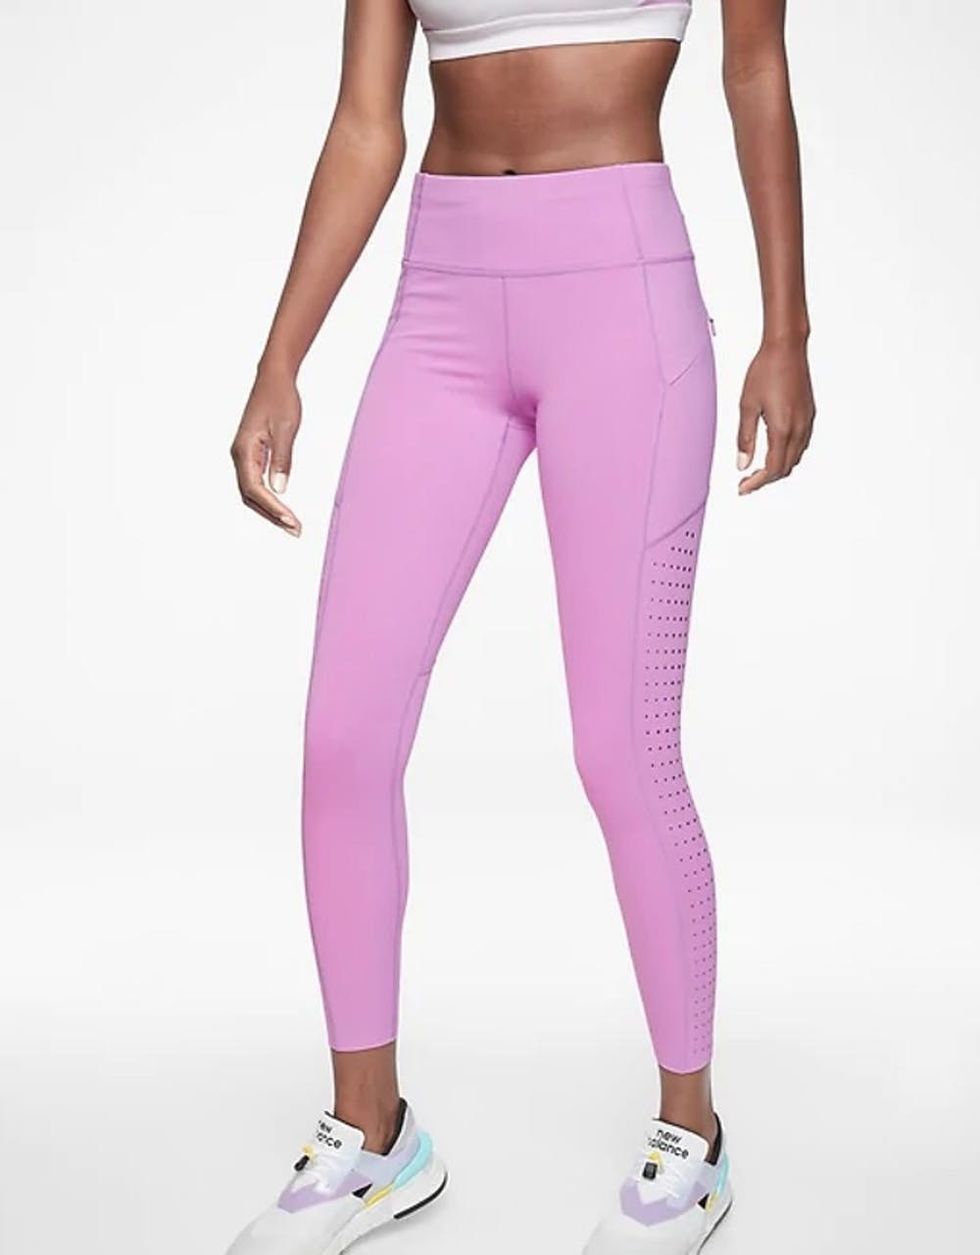 Hyper-Bright Fitness Gear to Wake Up Your Winter Workouts - Brit + Co